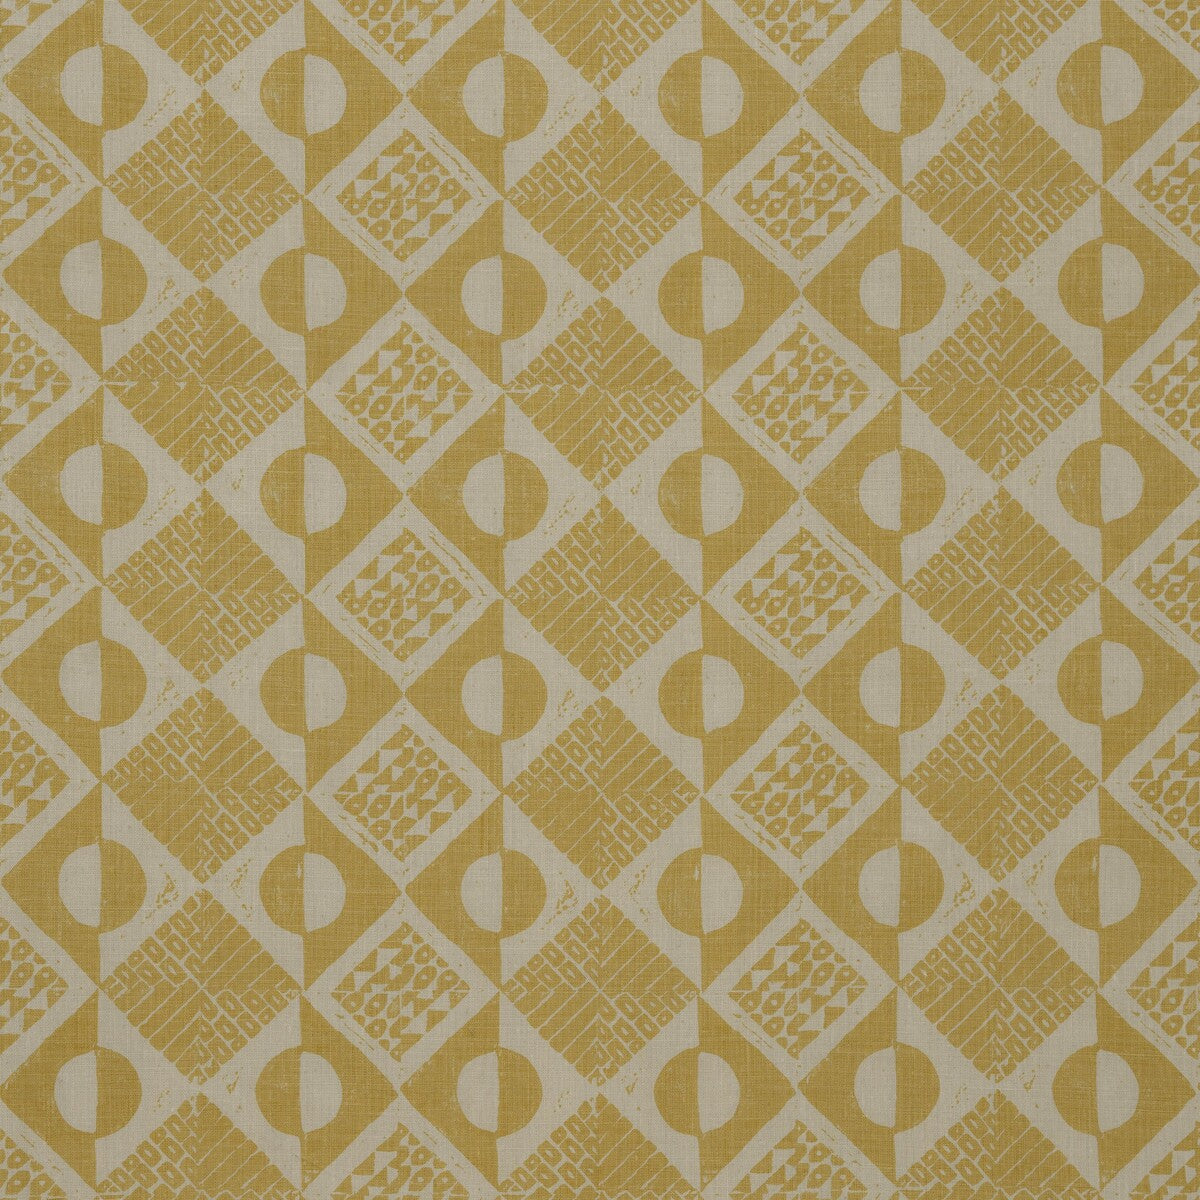 Circles And Squares fabric in ochre color - pattern BFC-3666.40.0 - by Lee Jofa in the Blithfield collection